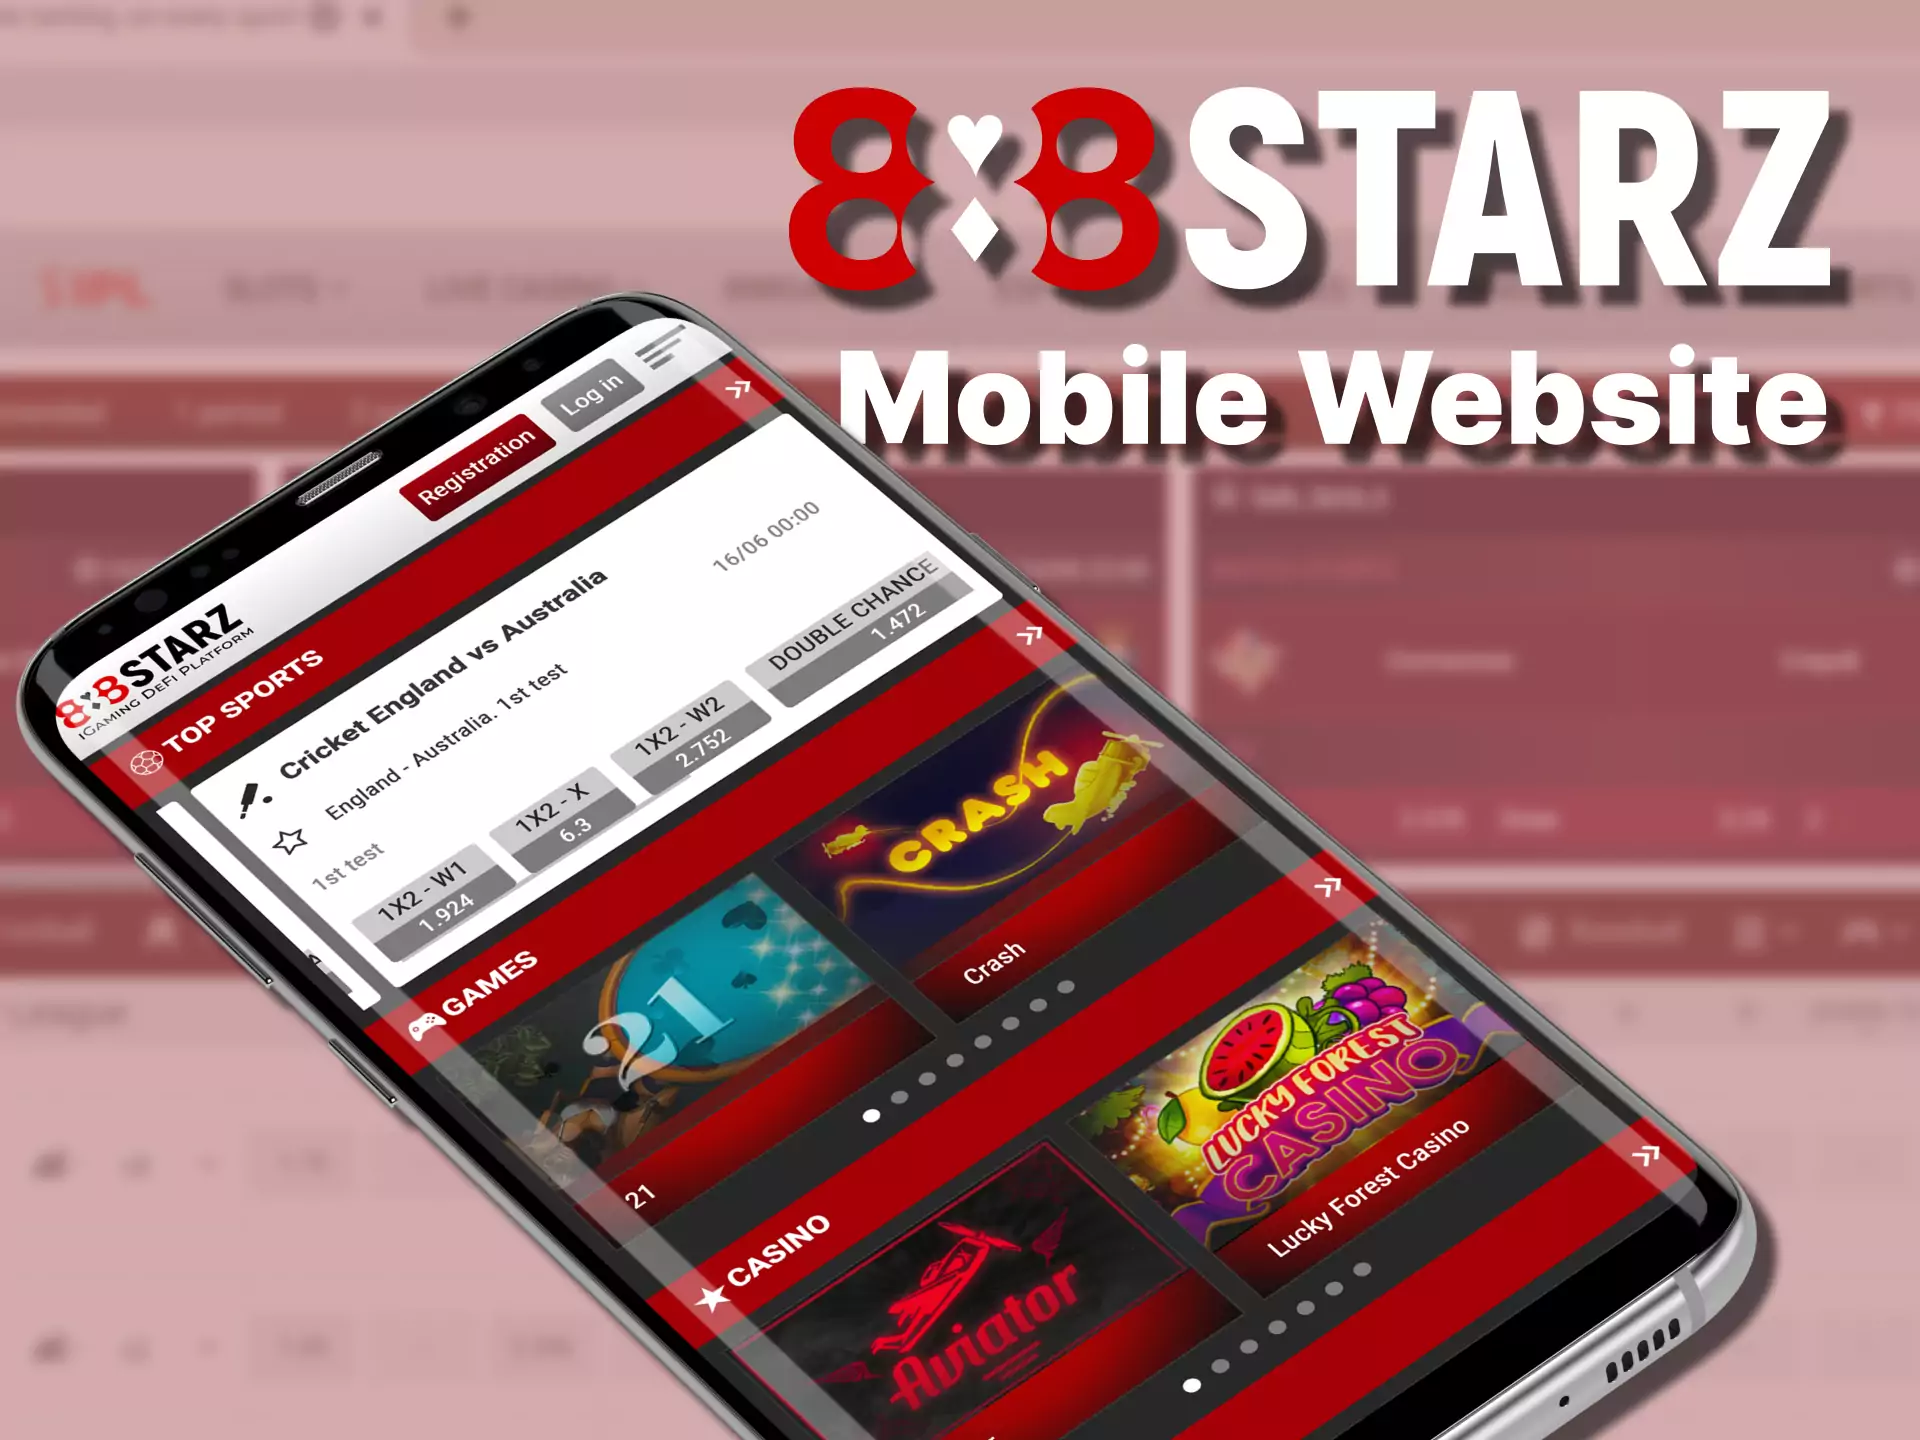 You have access to the convenient and functional mobile site 888starz for betting and casino games.